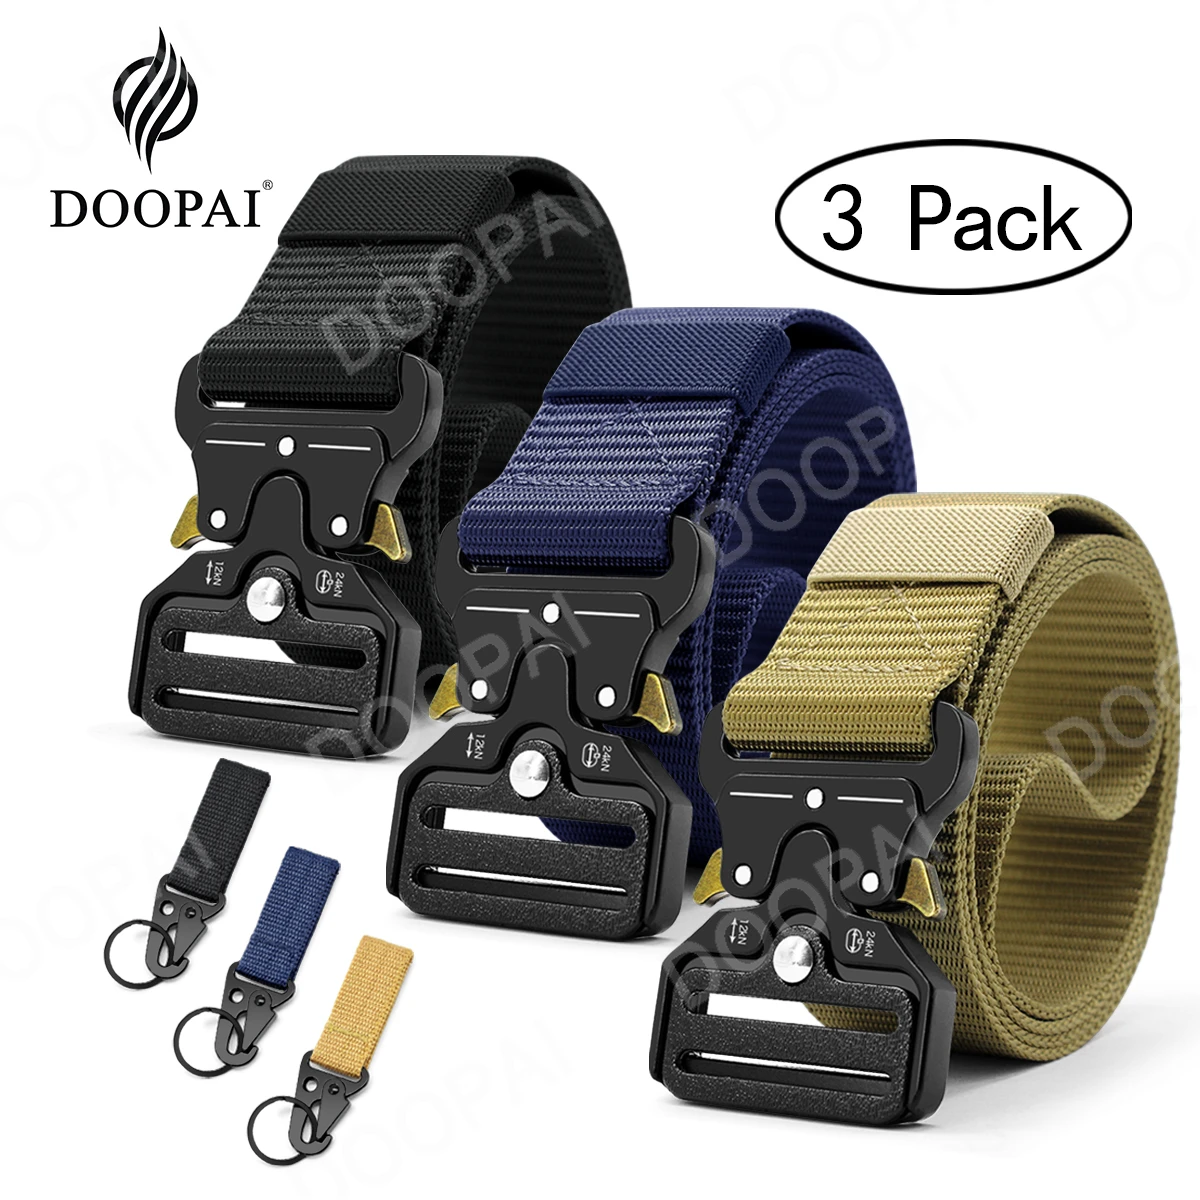 DOOPAI Tactical Army Men's Belt Military Nylon Outdoor Police Heavy Duty Training Hunting Combat Belt For Men 125/135CM/Wide 3.8